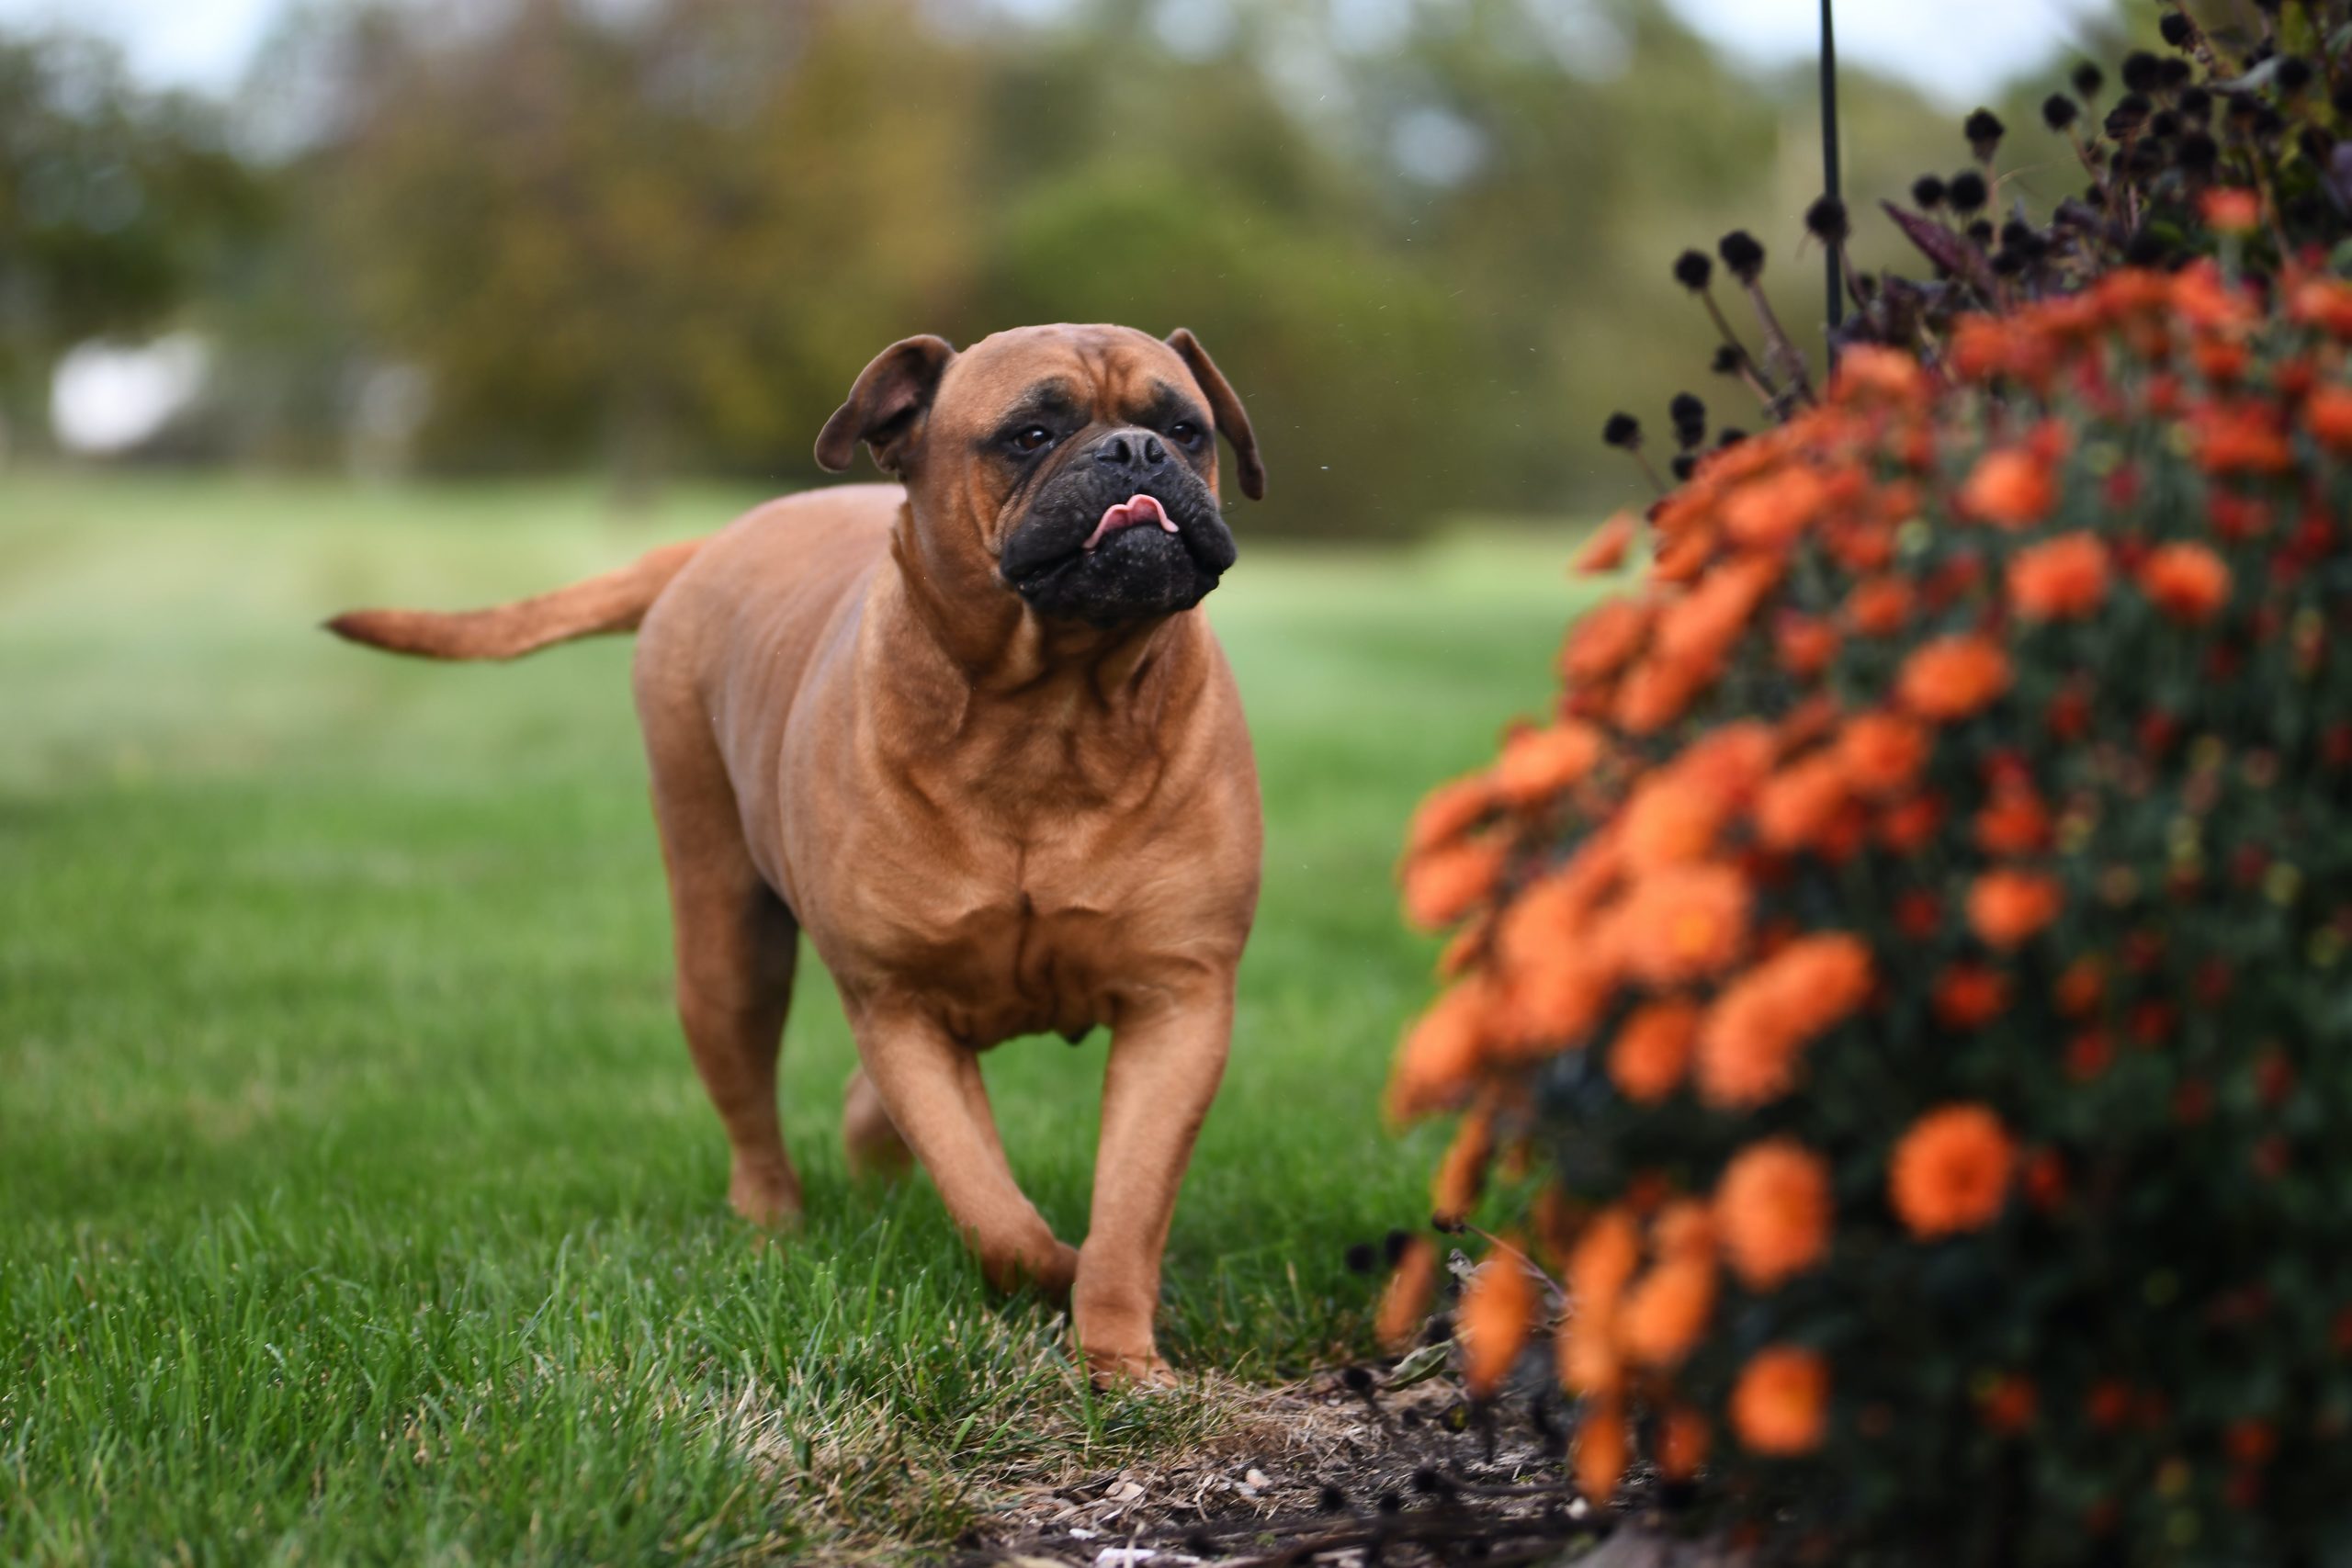 Bullmastiff playing in the back yard getting plenty of daily exercise that he needs